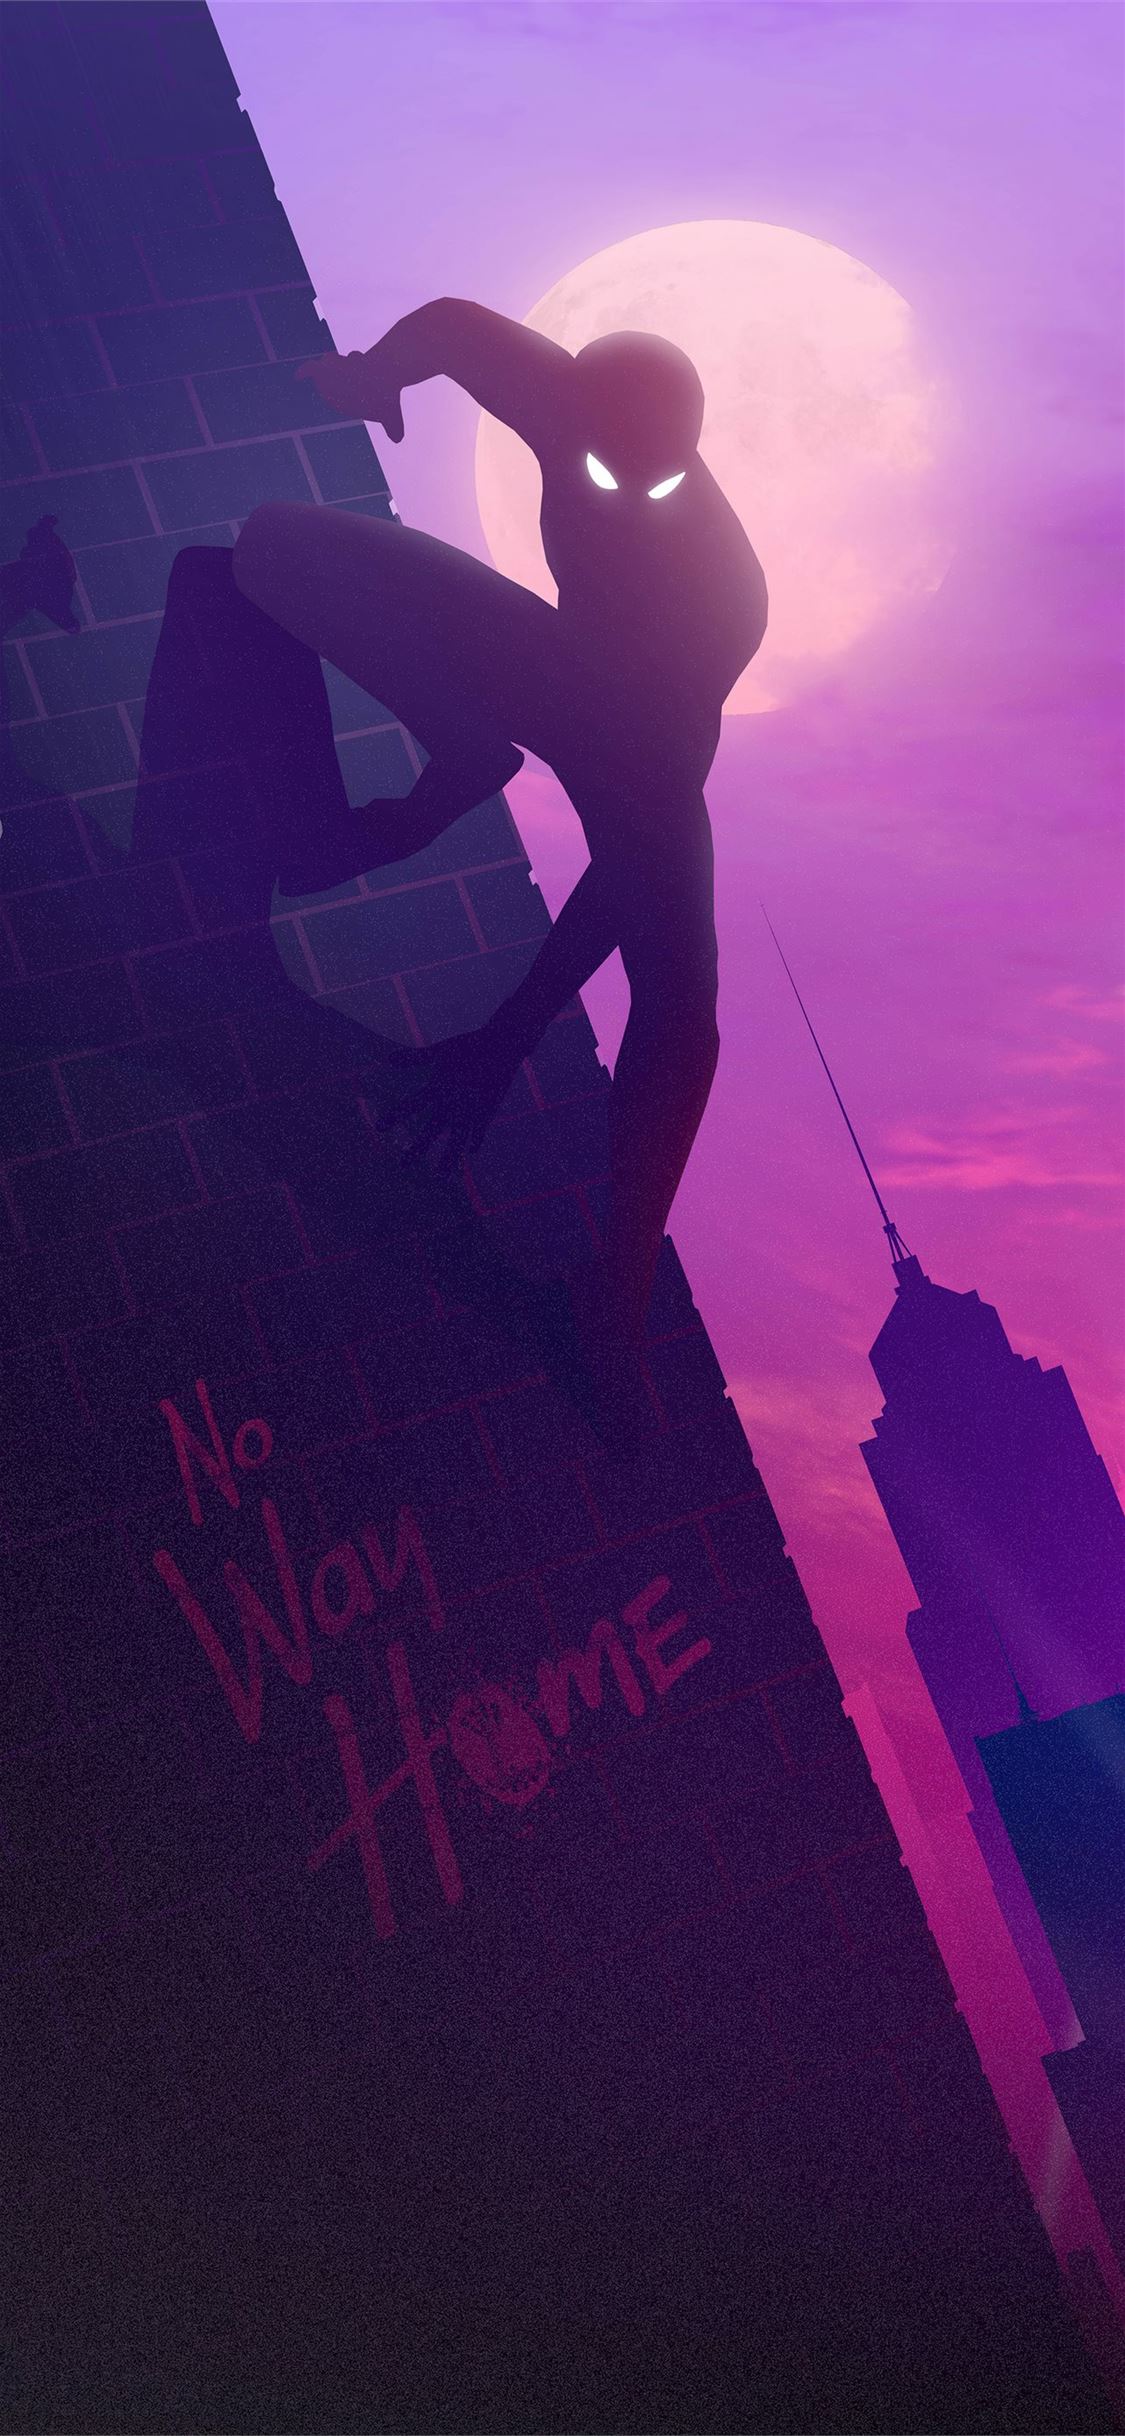 spiderman no way home poster 5k iPhone 11 Wallpapers Free Download